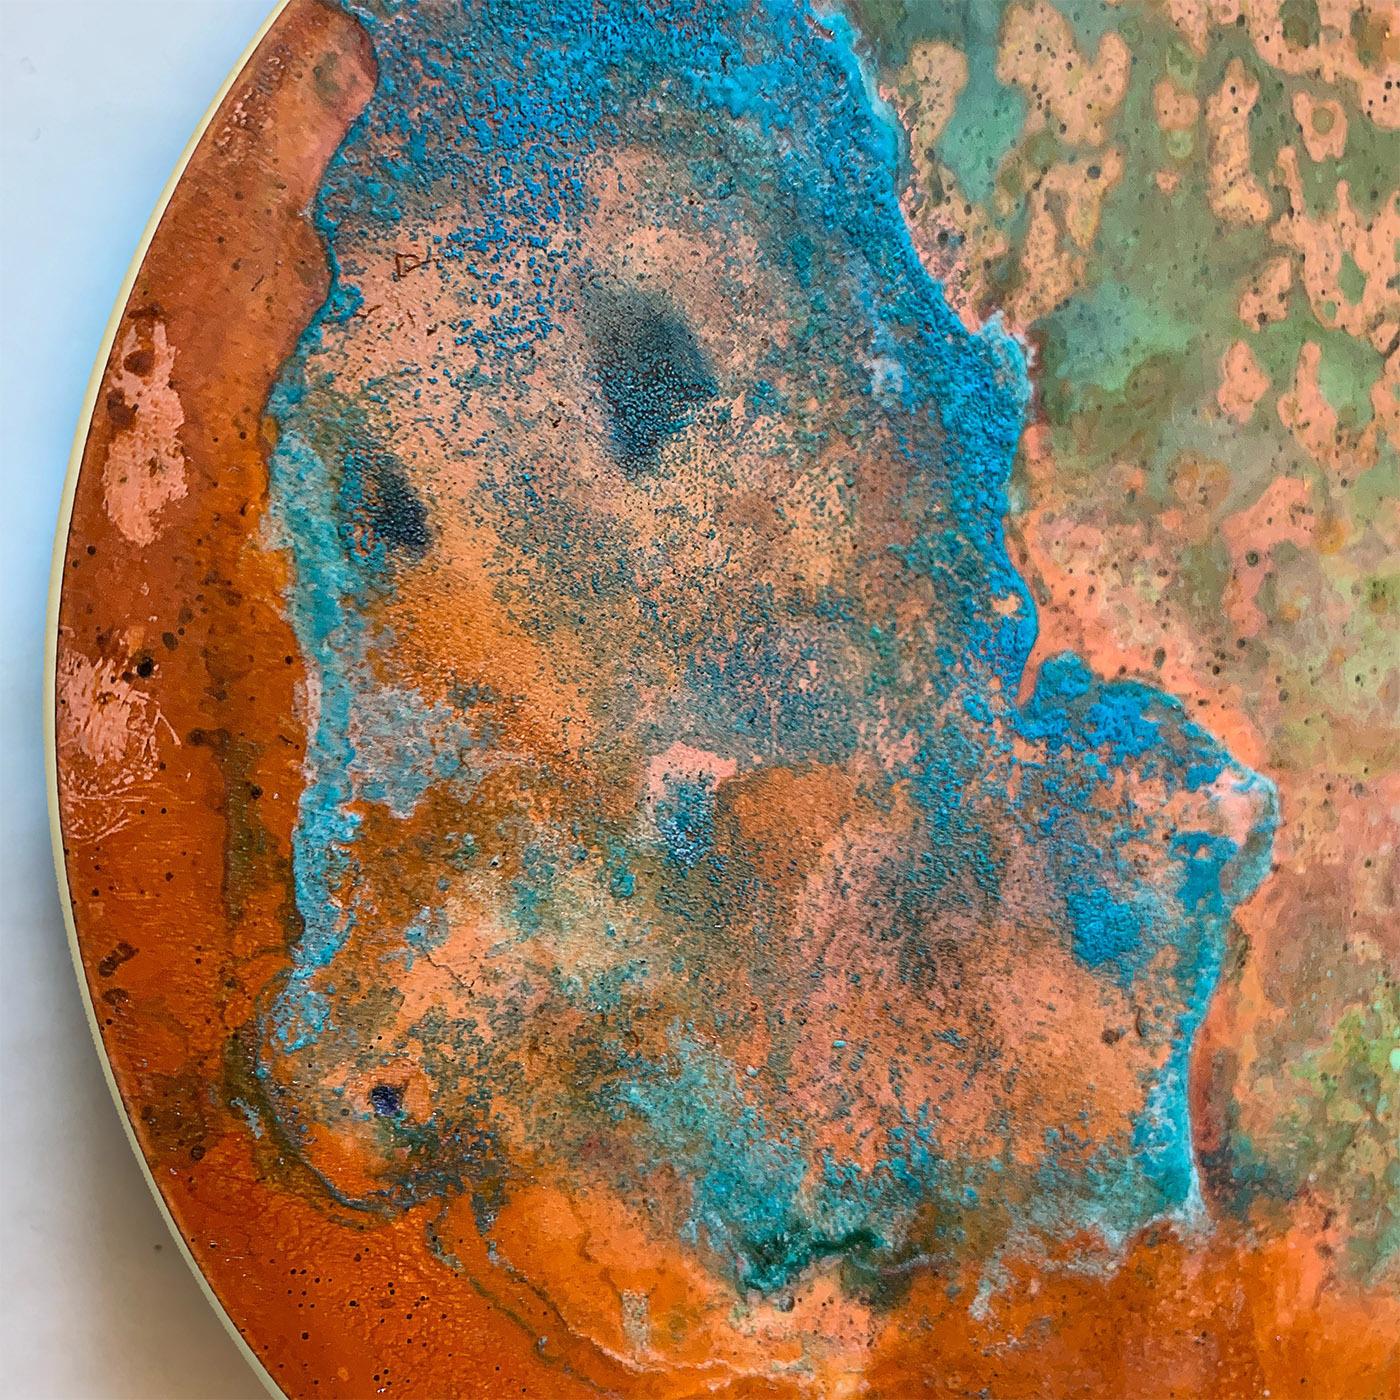 Deliberately corroded and decorated with oxides to achieve its unreplicable traceries and shades, this decorative disk from the Aurora Collection is carefully handcrafted with sunrises in mind. Warm and cool tones blend in a breathtaking design that